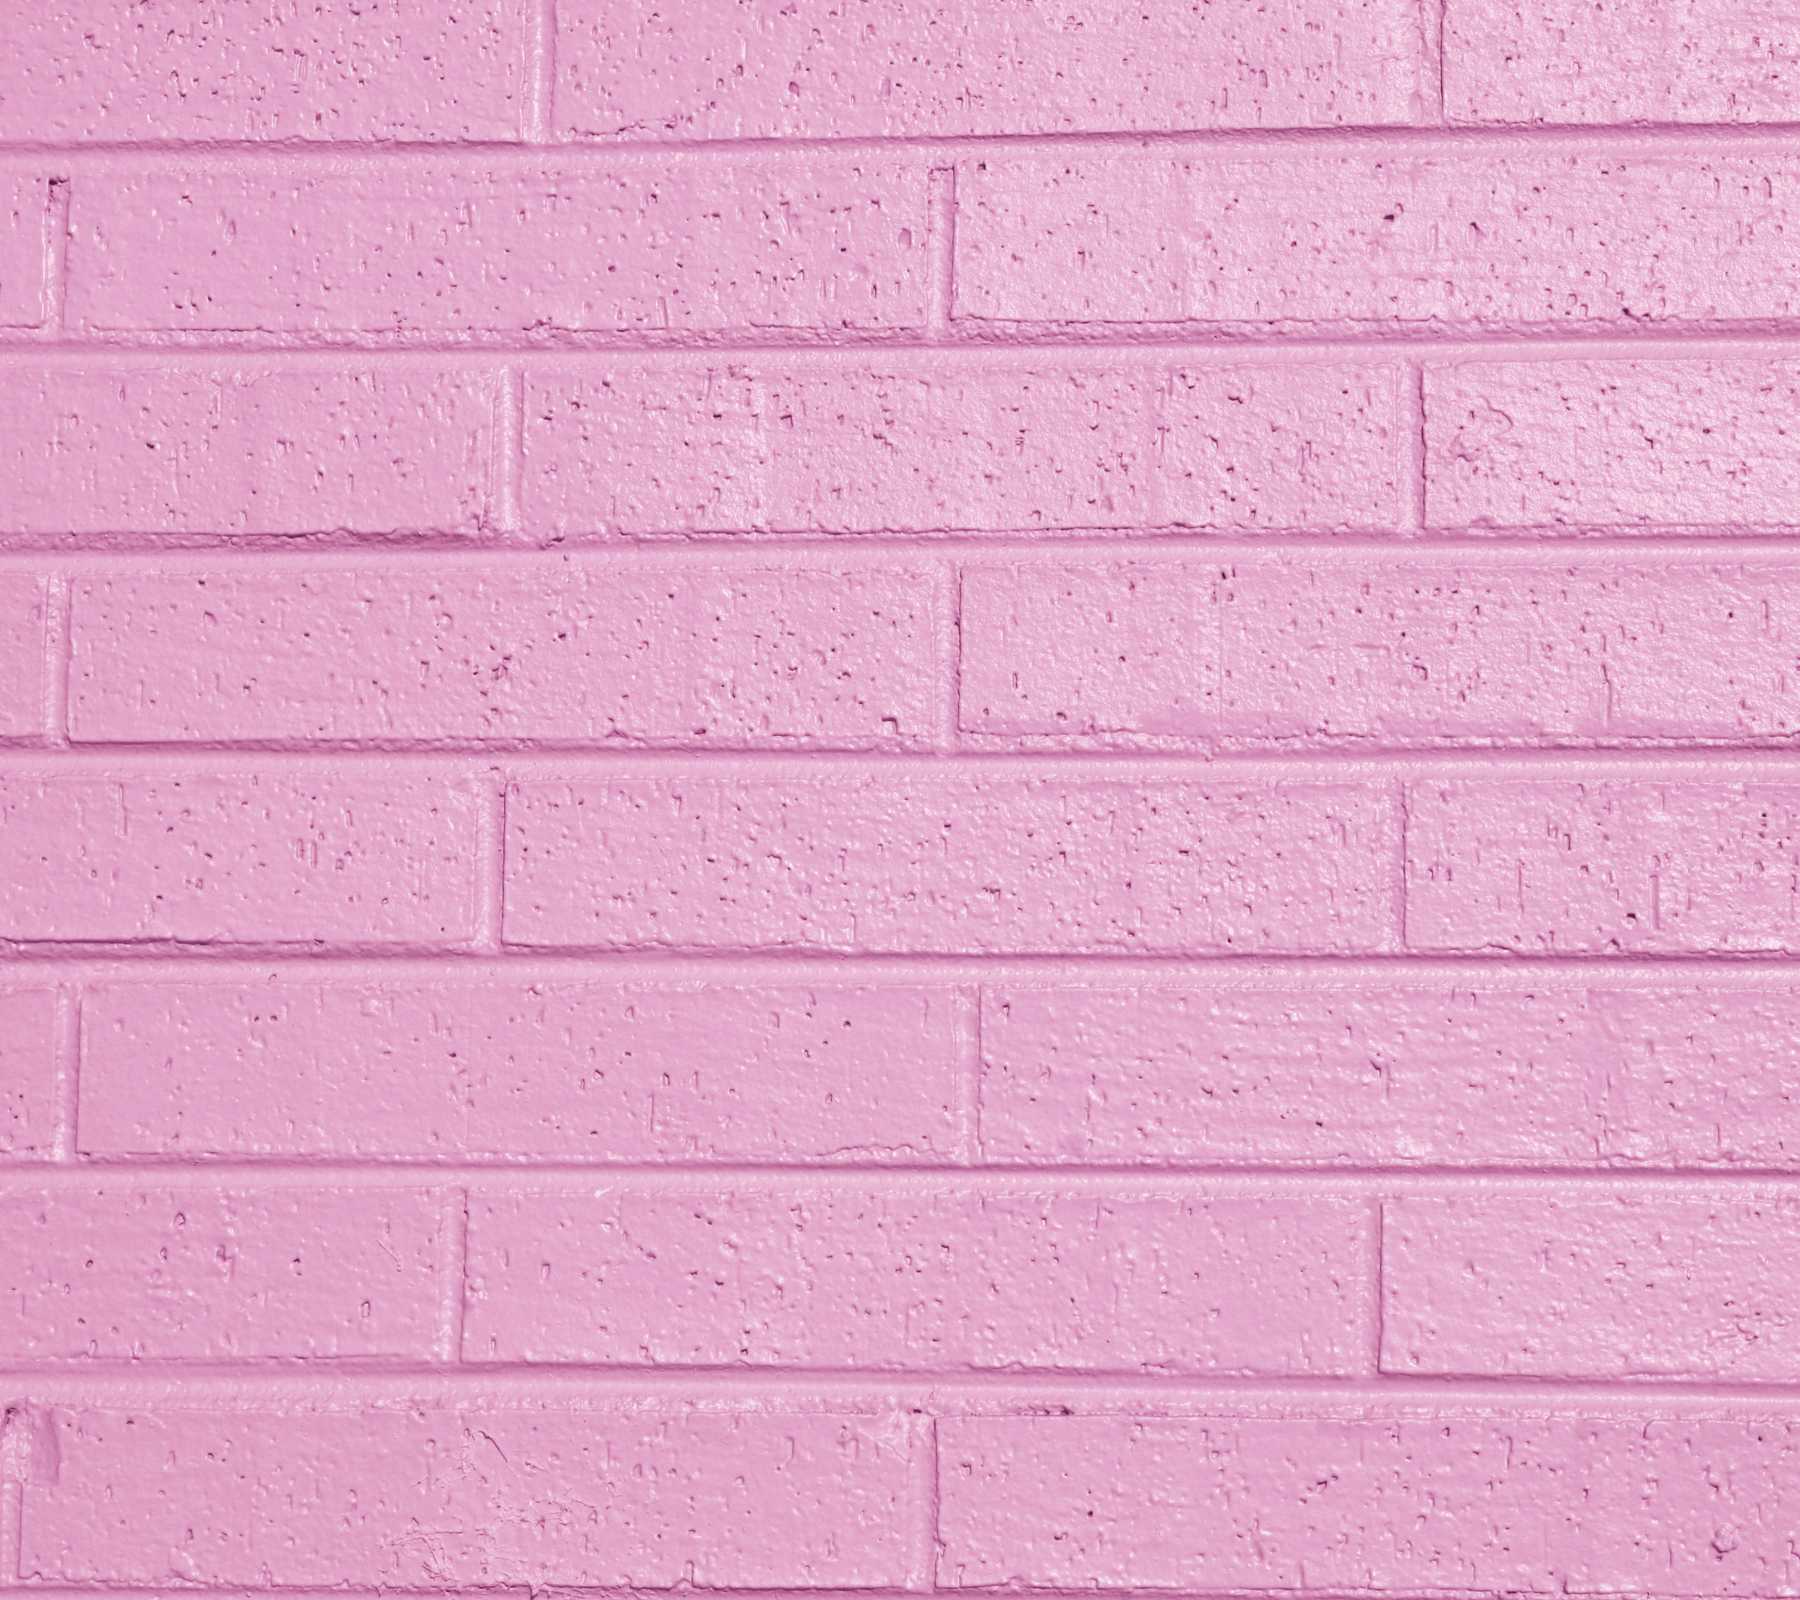 Pink Polos Backgrounds - Wallpaper Cave